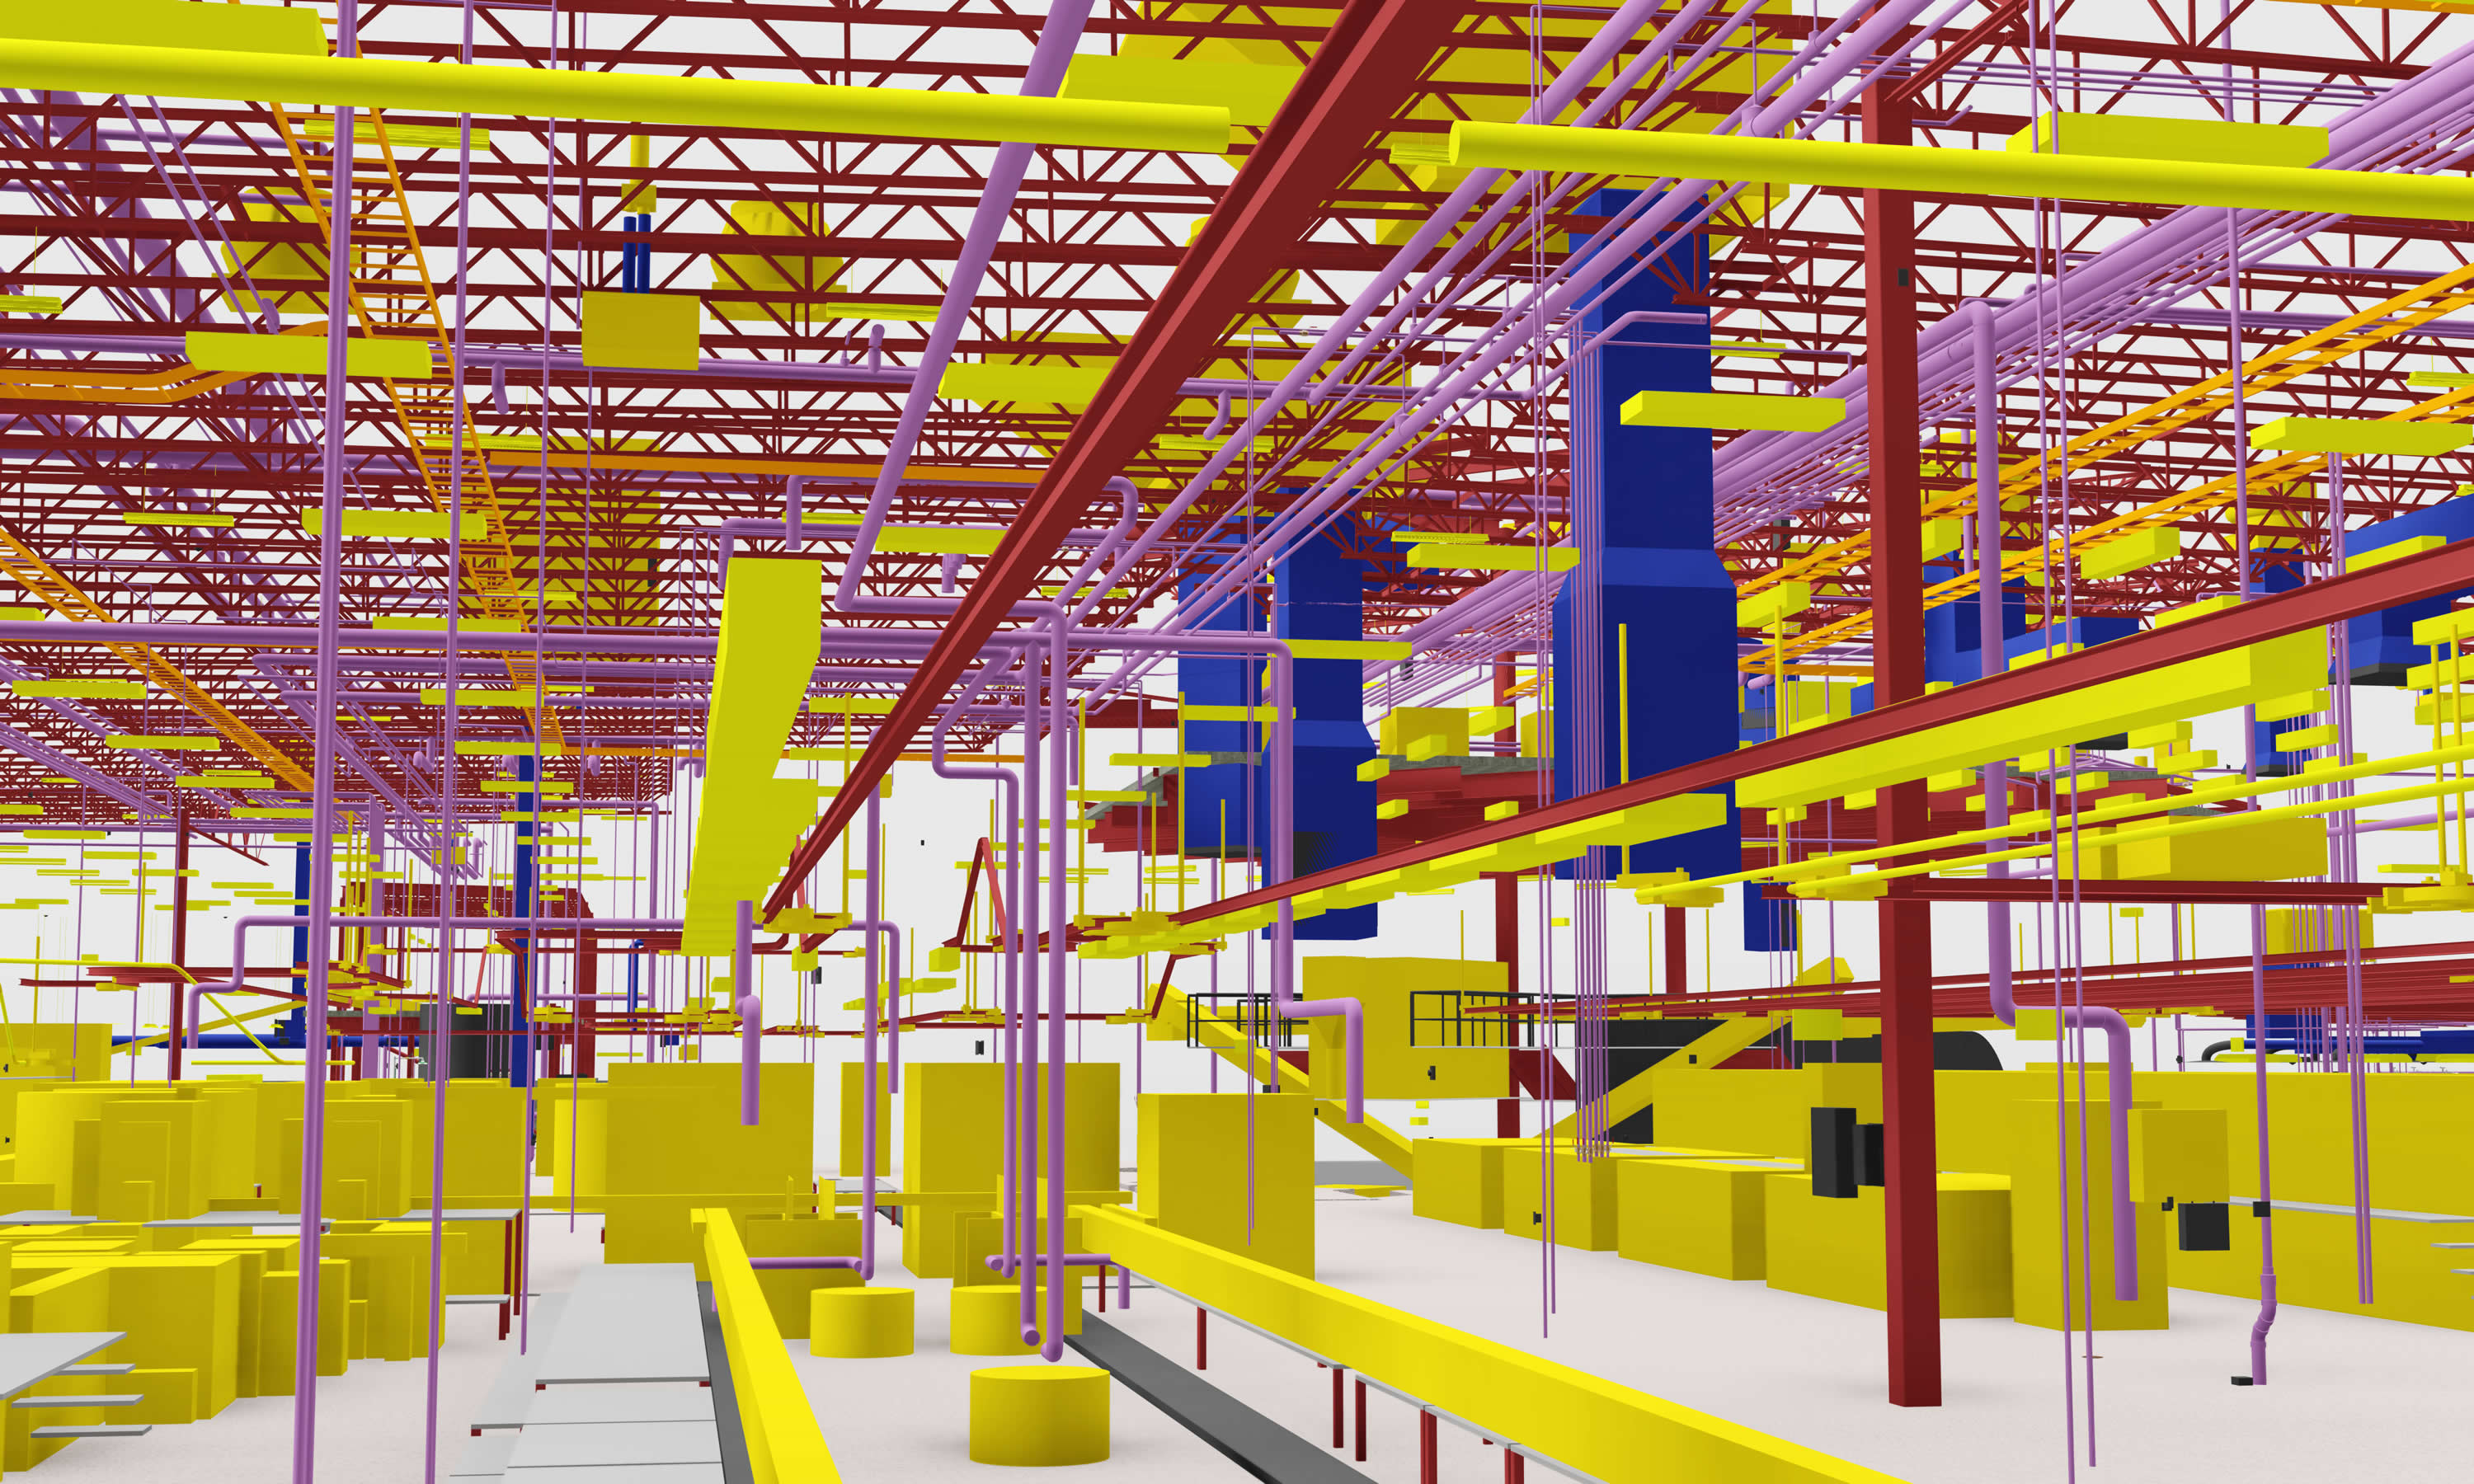 3D rendering of a food production facility